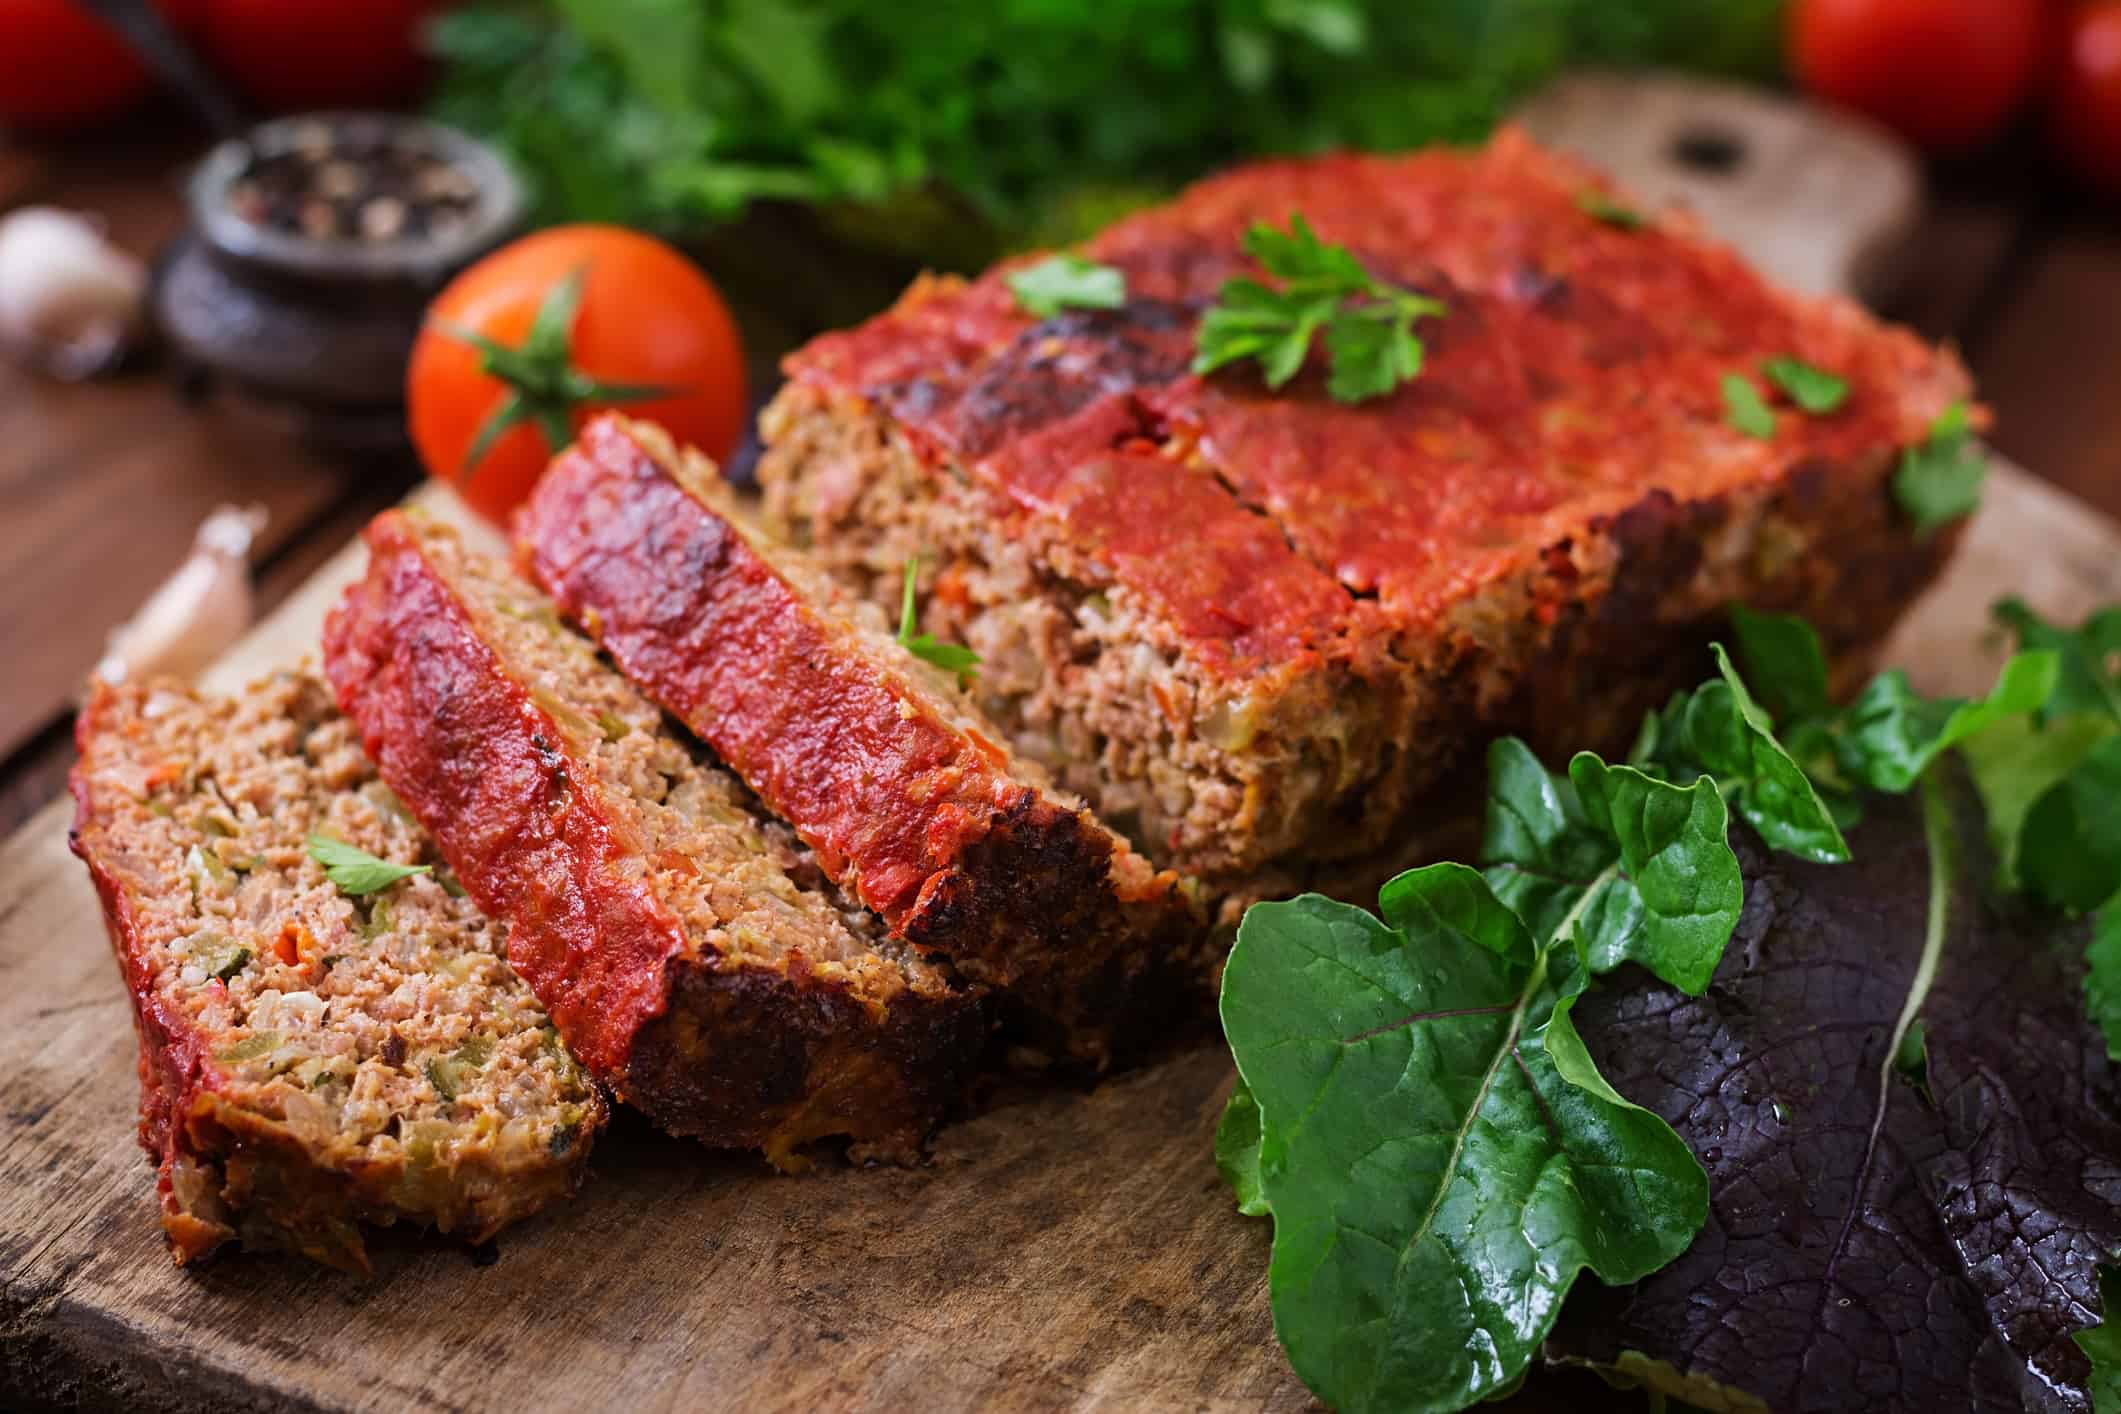 Mama Shirley's meatloaf recipe